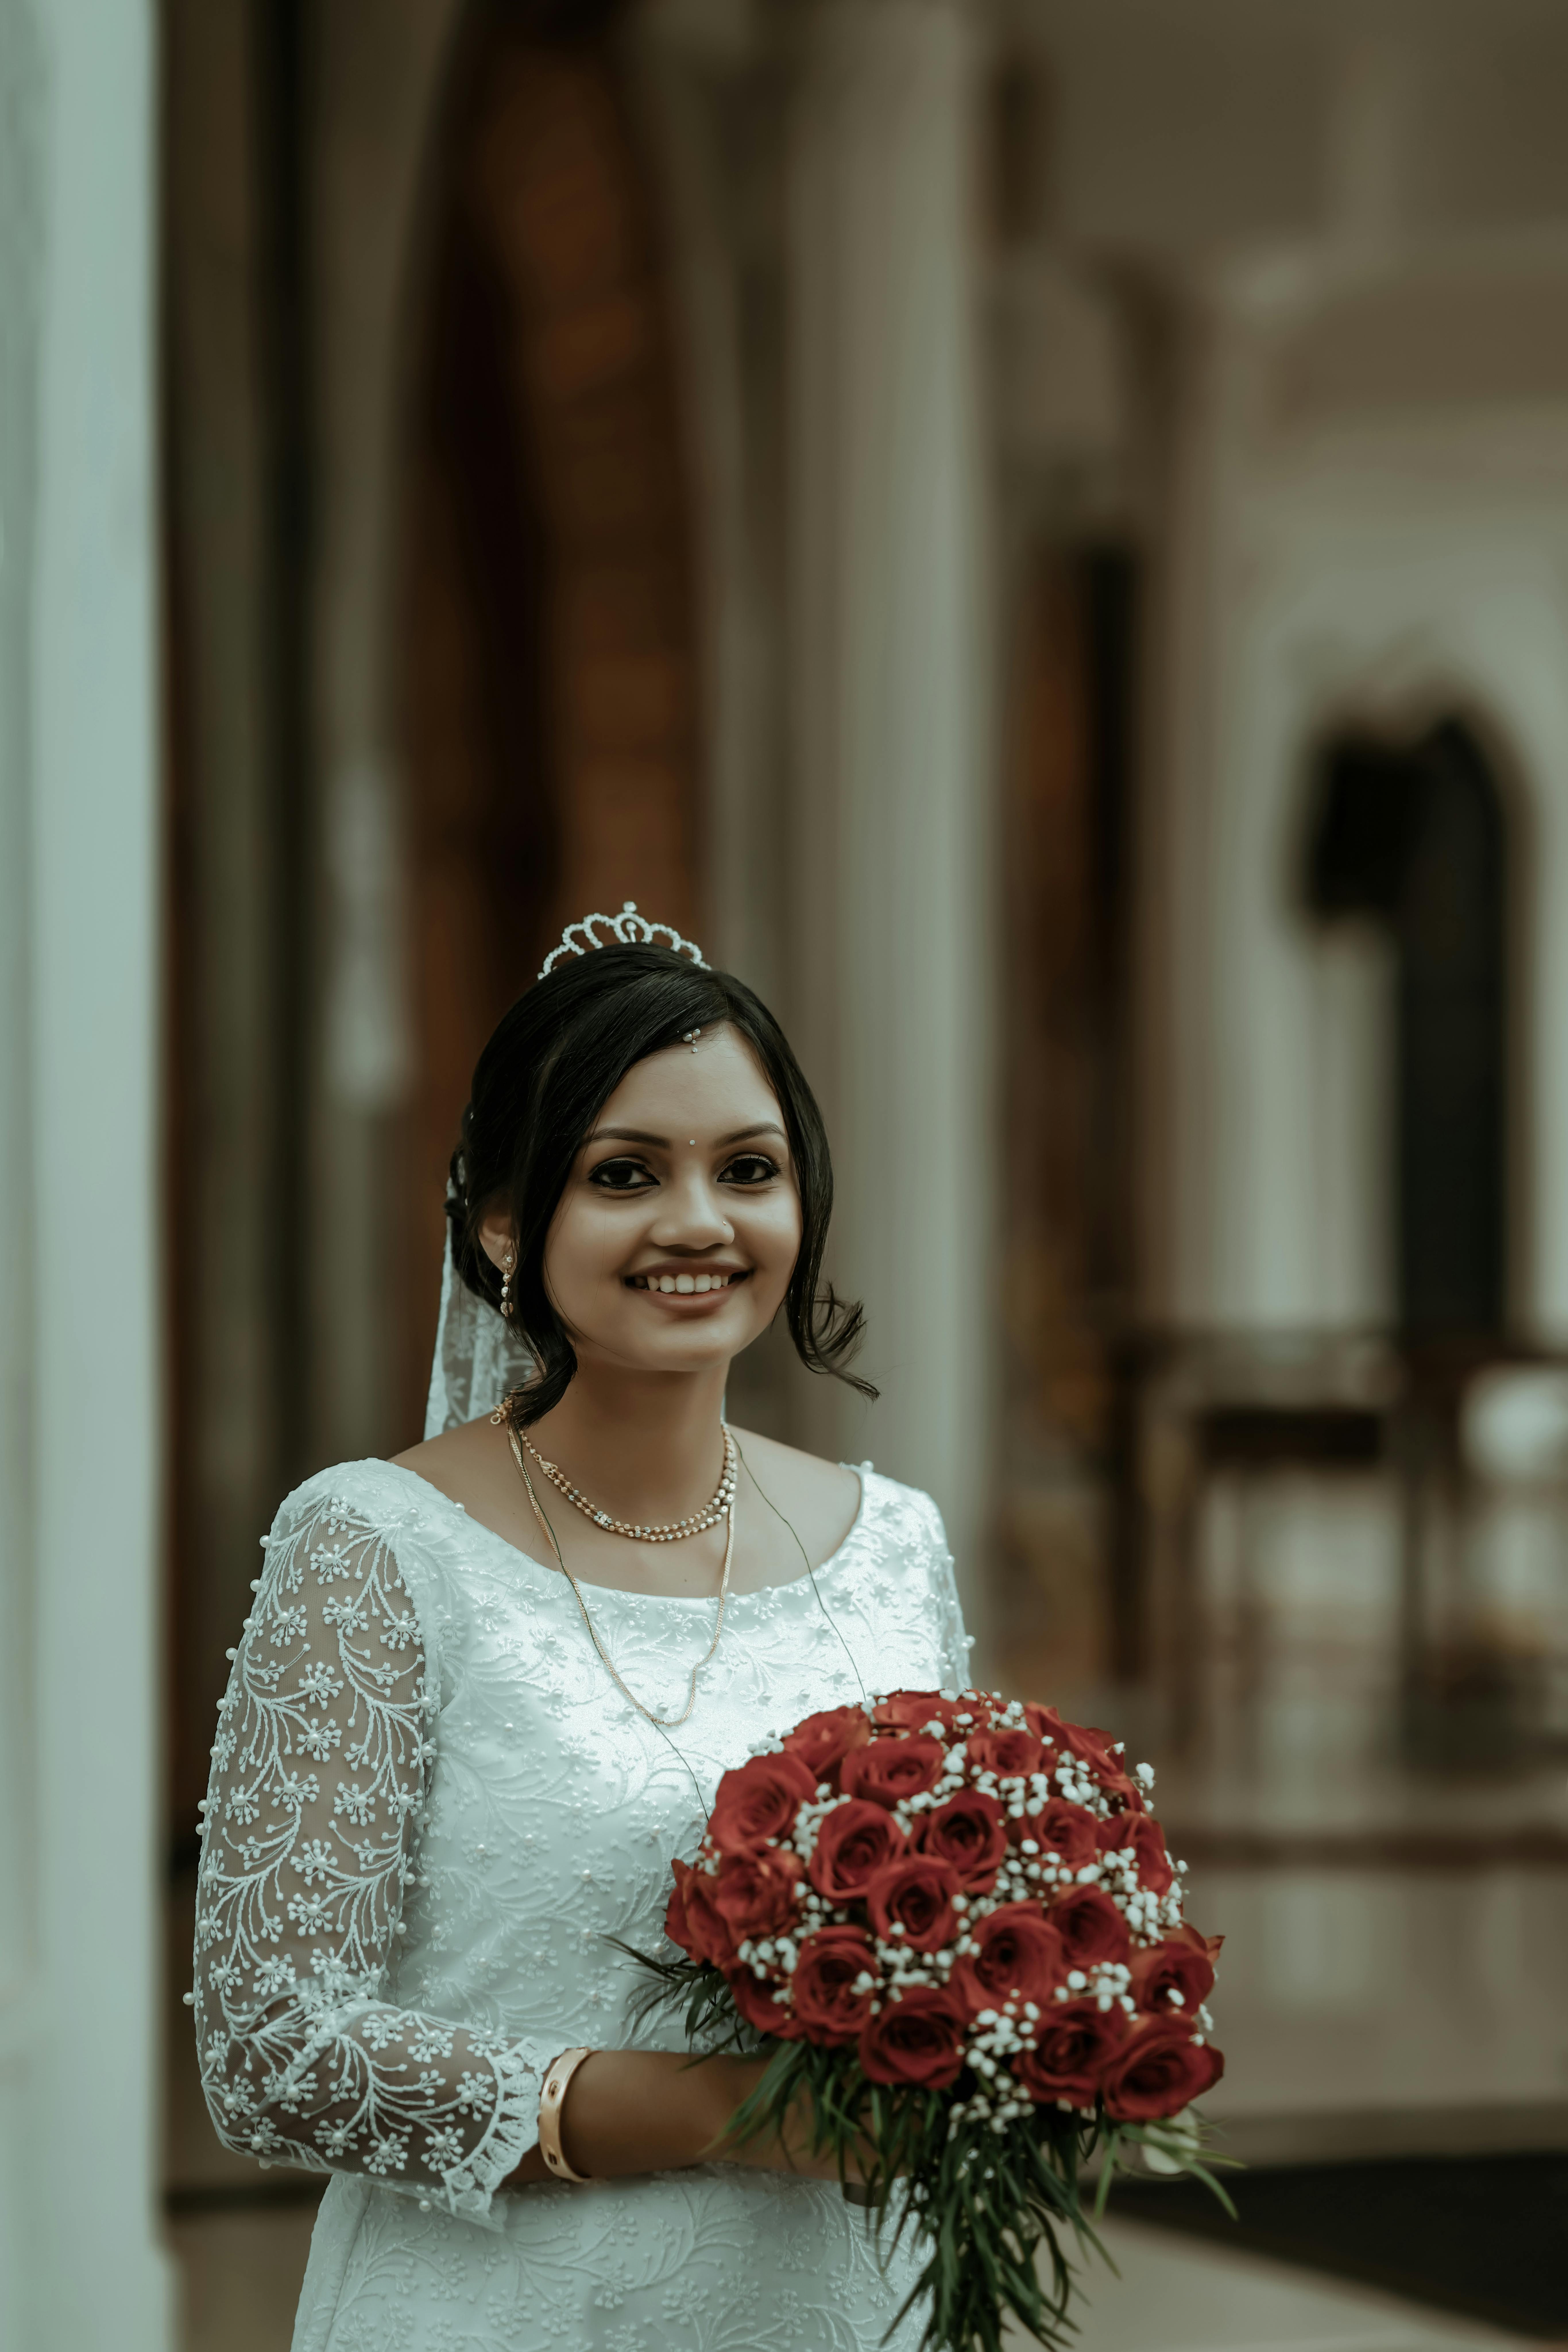 Giving a Modern Look To The Traditional Kerala Bride | by Jawad Akhtar |  Medium